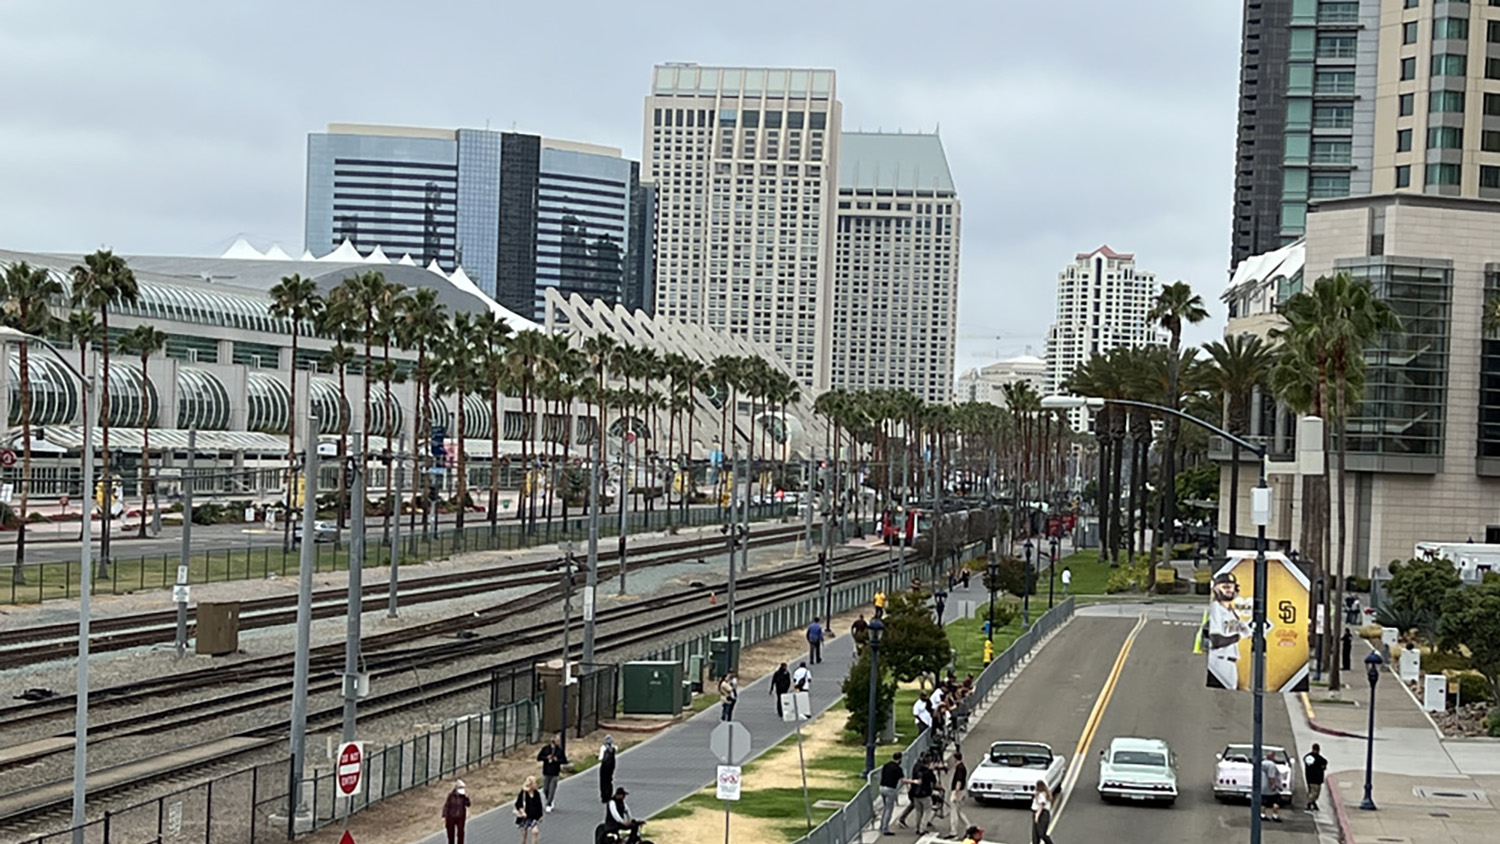 A street scene in San Diego, CA during the ELI Annual Meeting.